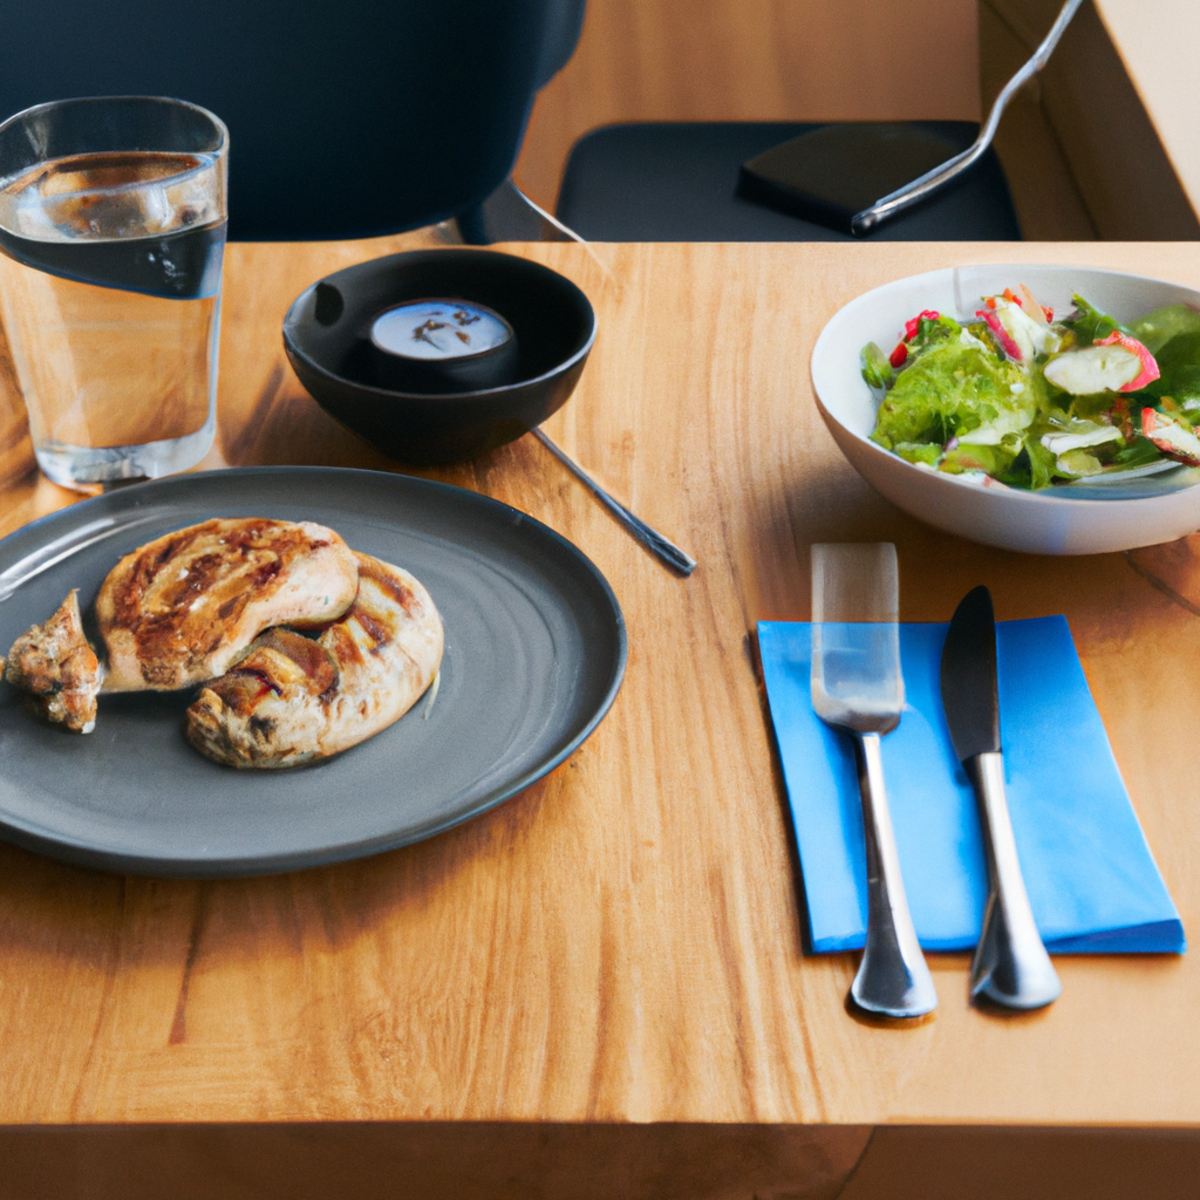 The photo shows a wooden table with a plate of grilled chicken, a bowl of mixed greens, and a glass of water. Next to it is a stopwatch and a fitness tracker. On the other side of the table, there is a plate of pancakes with syrup and a cup of coffee. The contrast between the healthy and indulgent options highlights the pros and cons of exercising while intermittent fasting. The natural lighting and composition of the photo make the objects look appetizing and inviting.